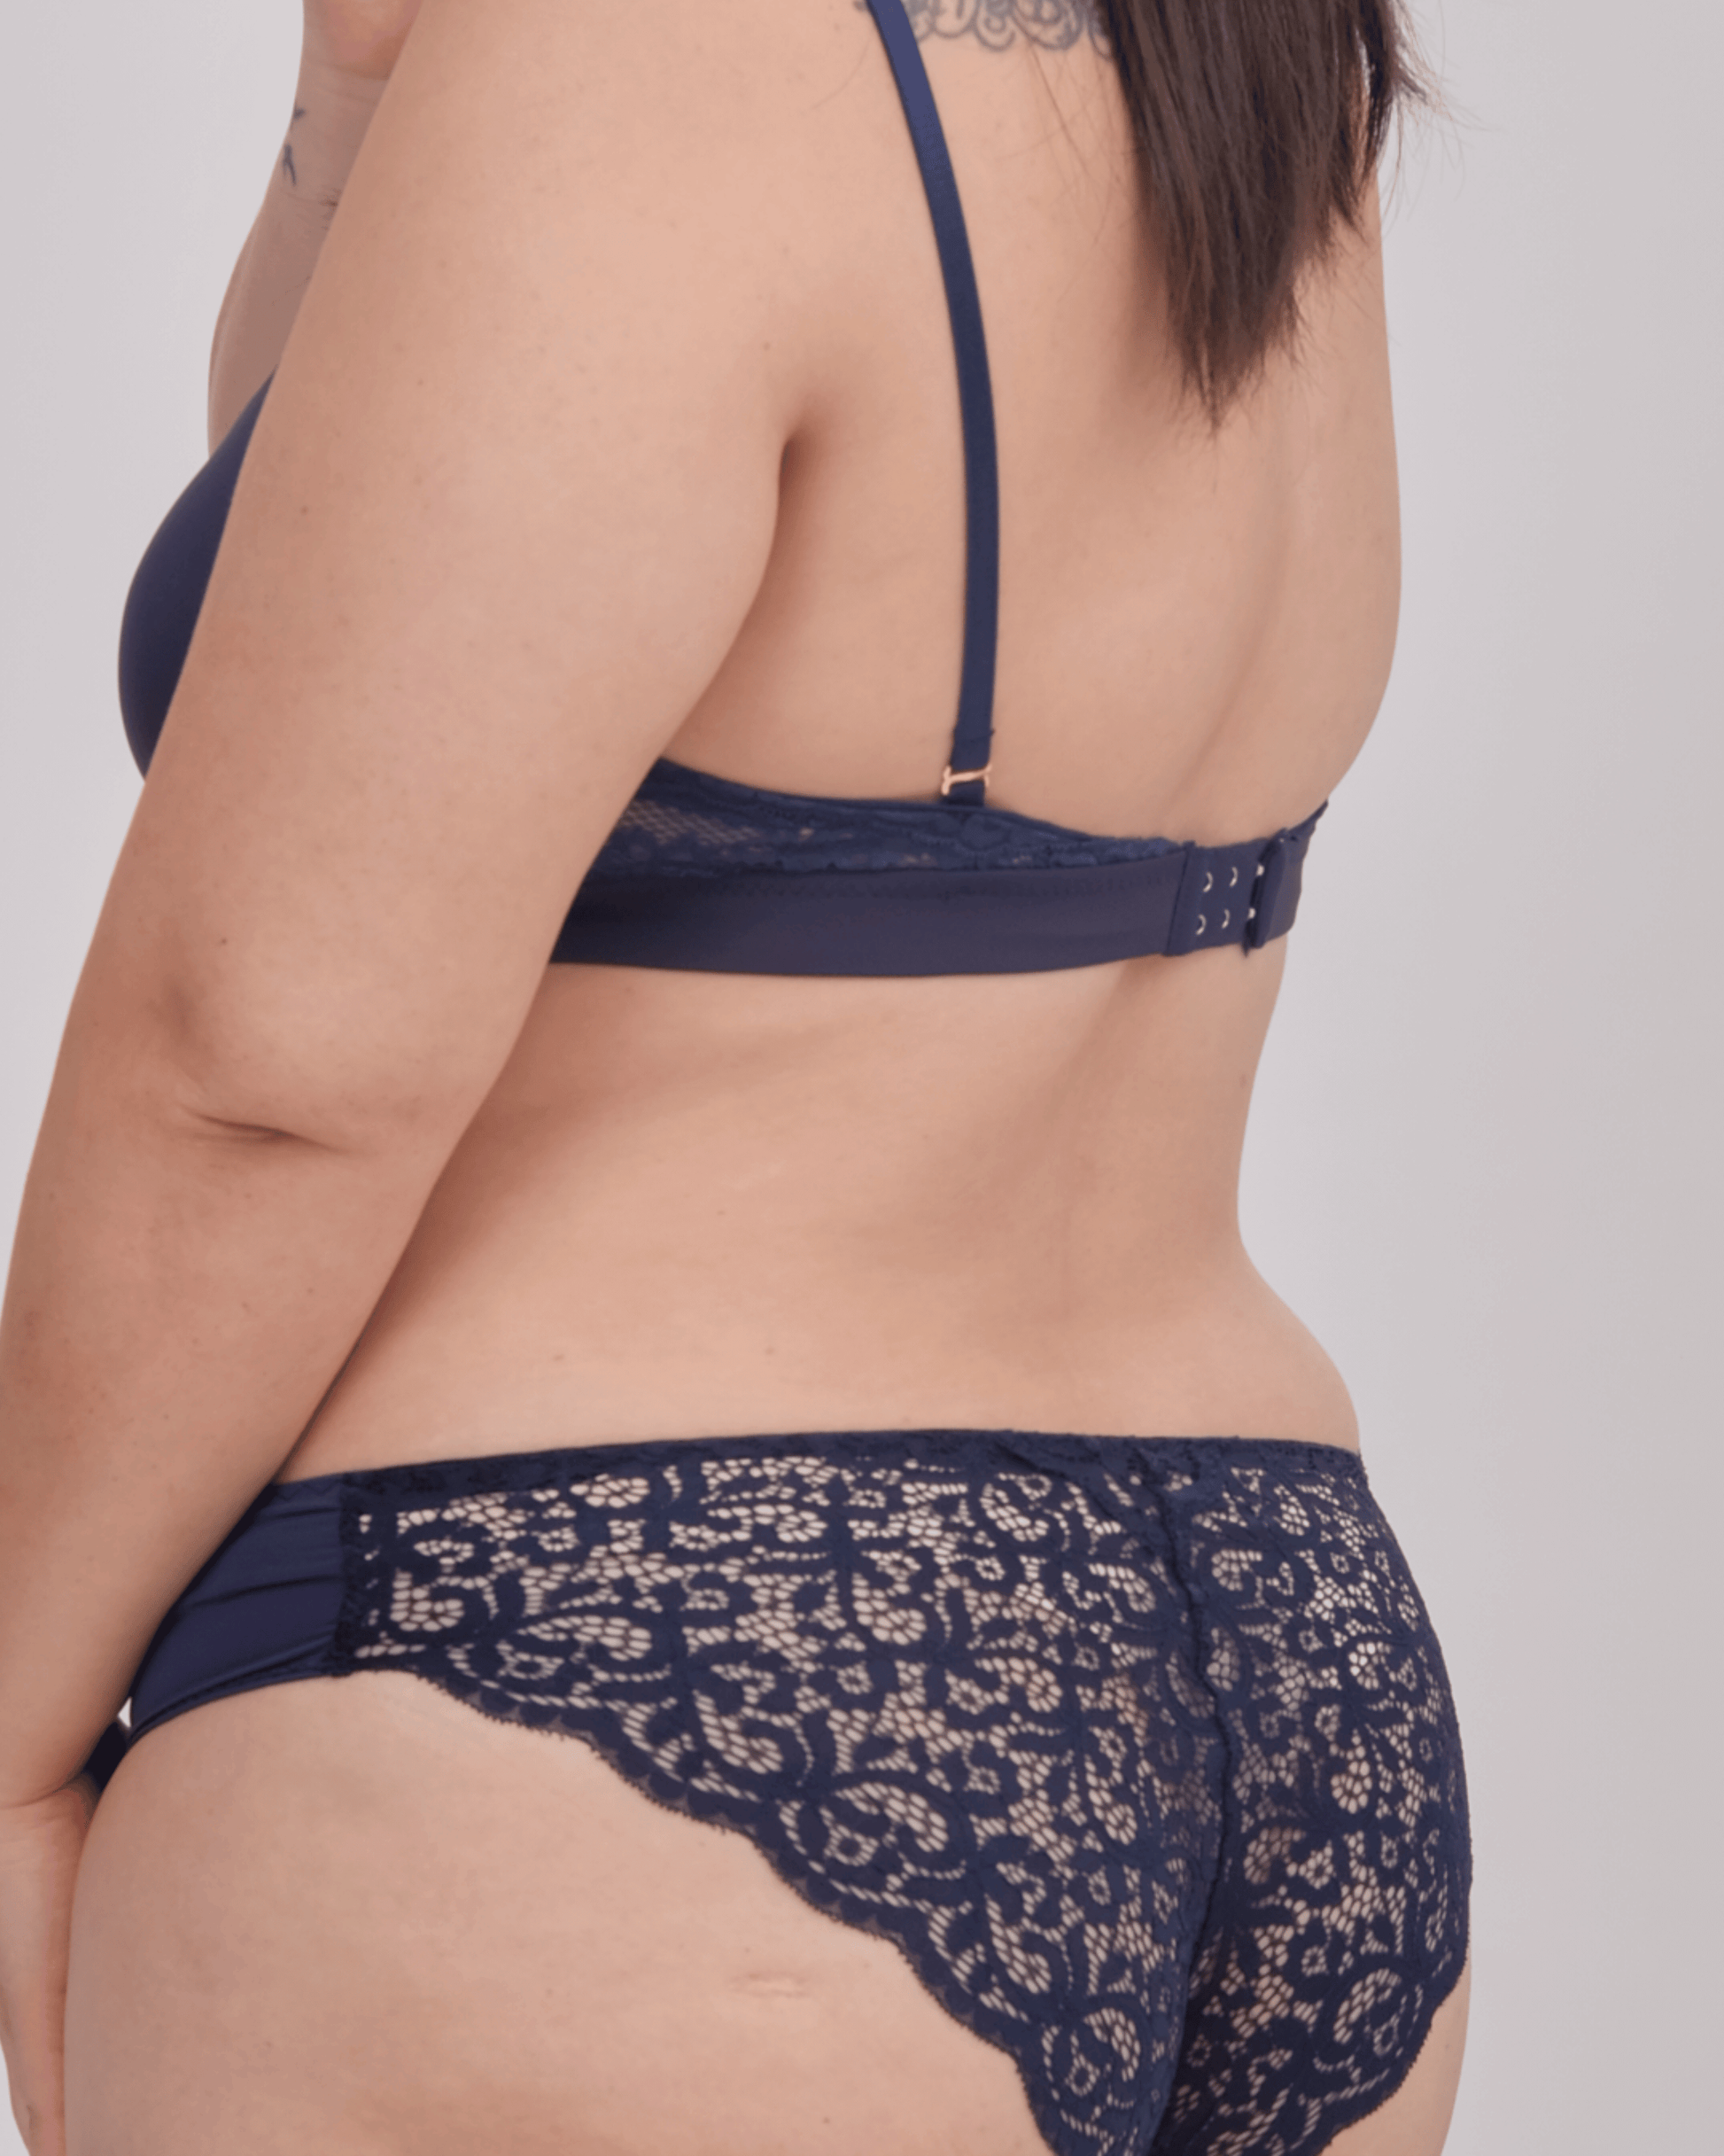 pasion lace back navy panty – Our Bralette Club